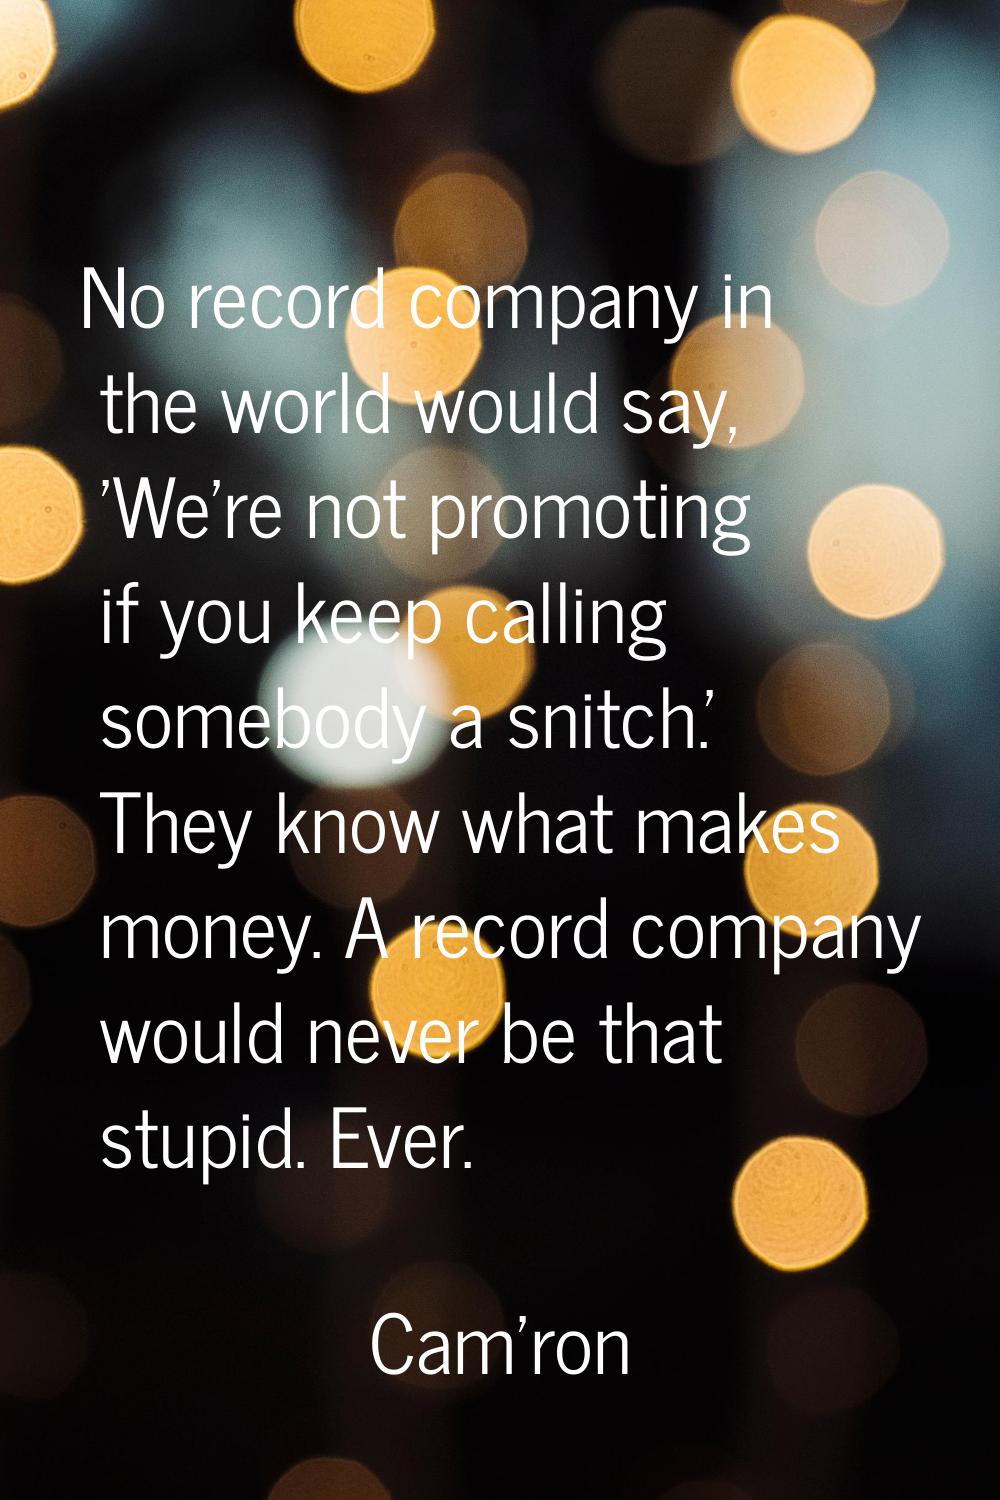 No record company in the world would say, 'We're not promoting if you keep calling somebody a snitc